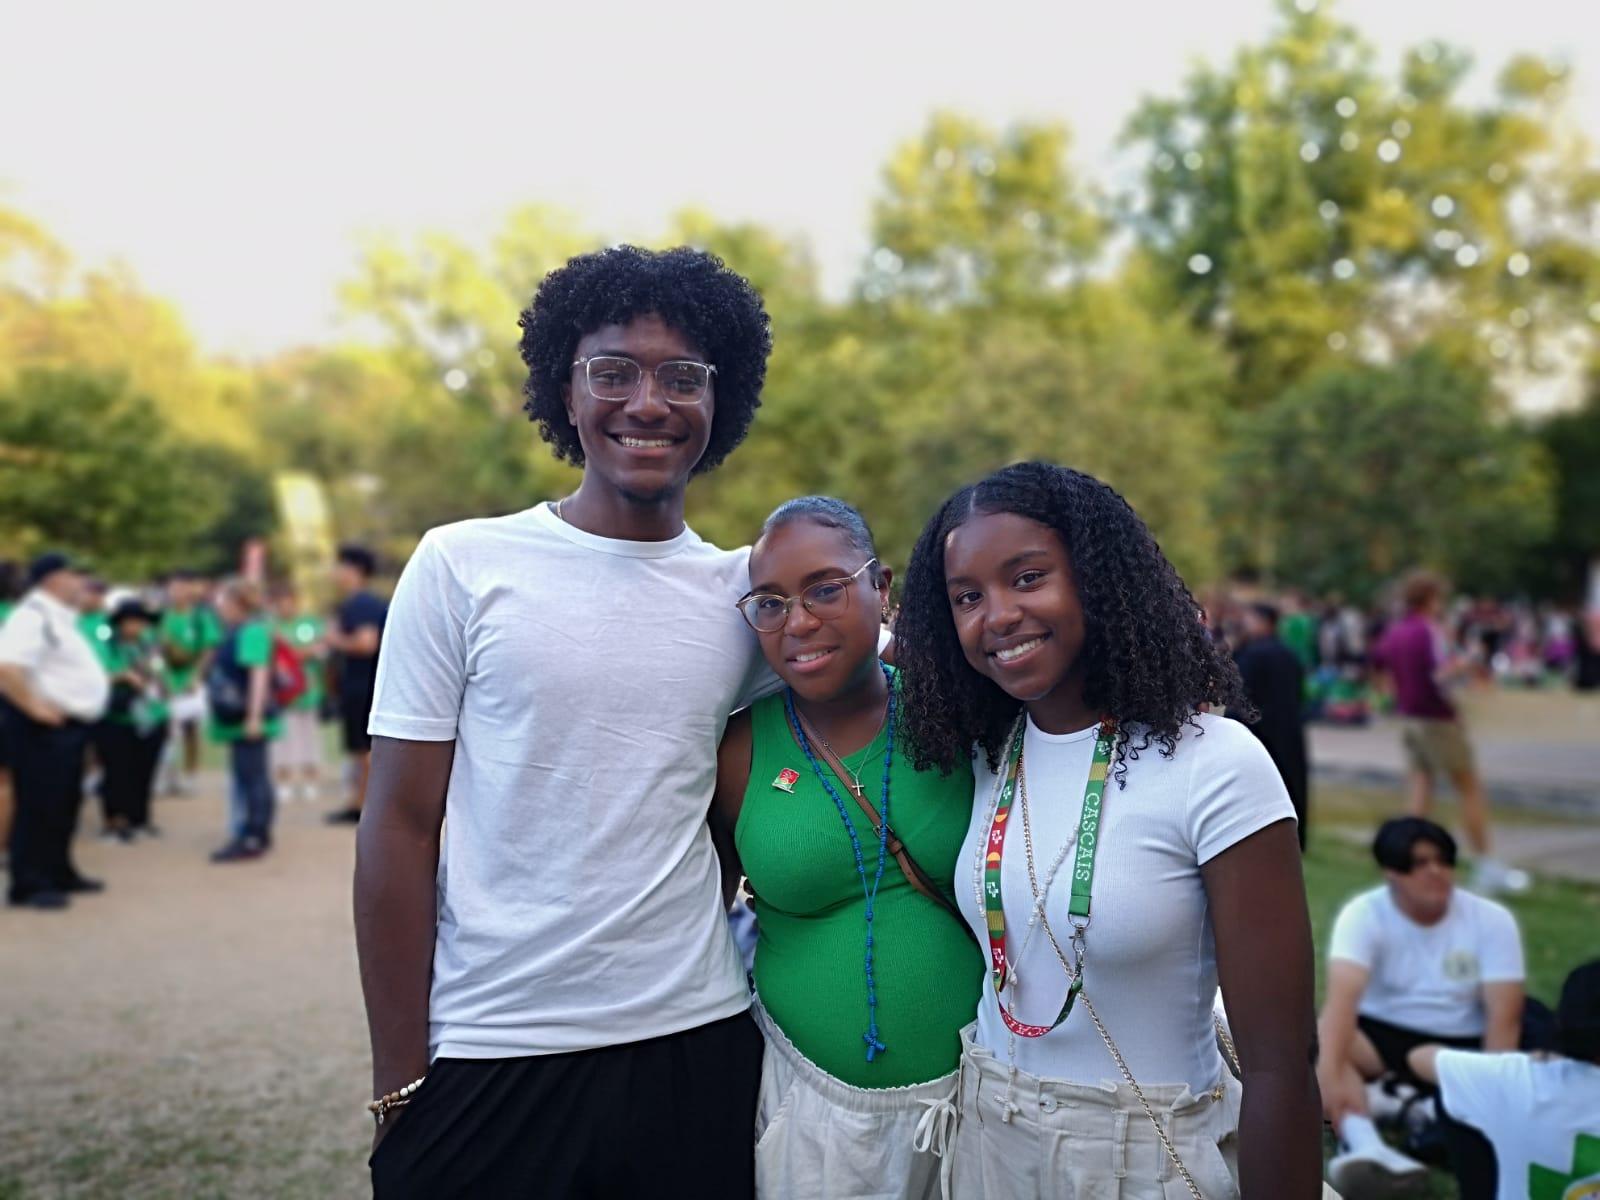 Boston siblings defy the odds, say ‘miracle’ allowed them to attend WYD